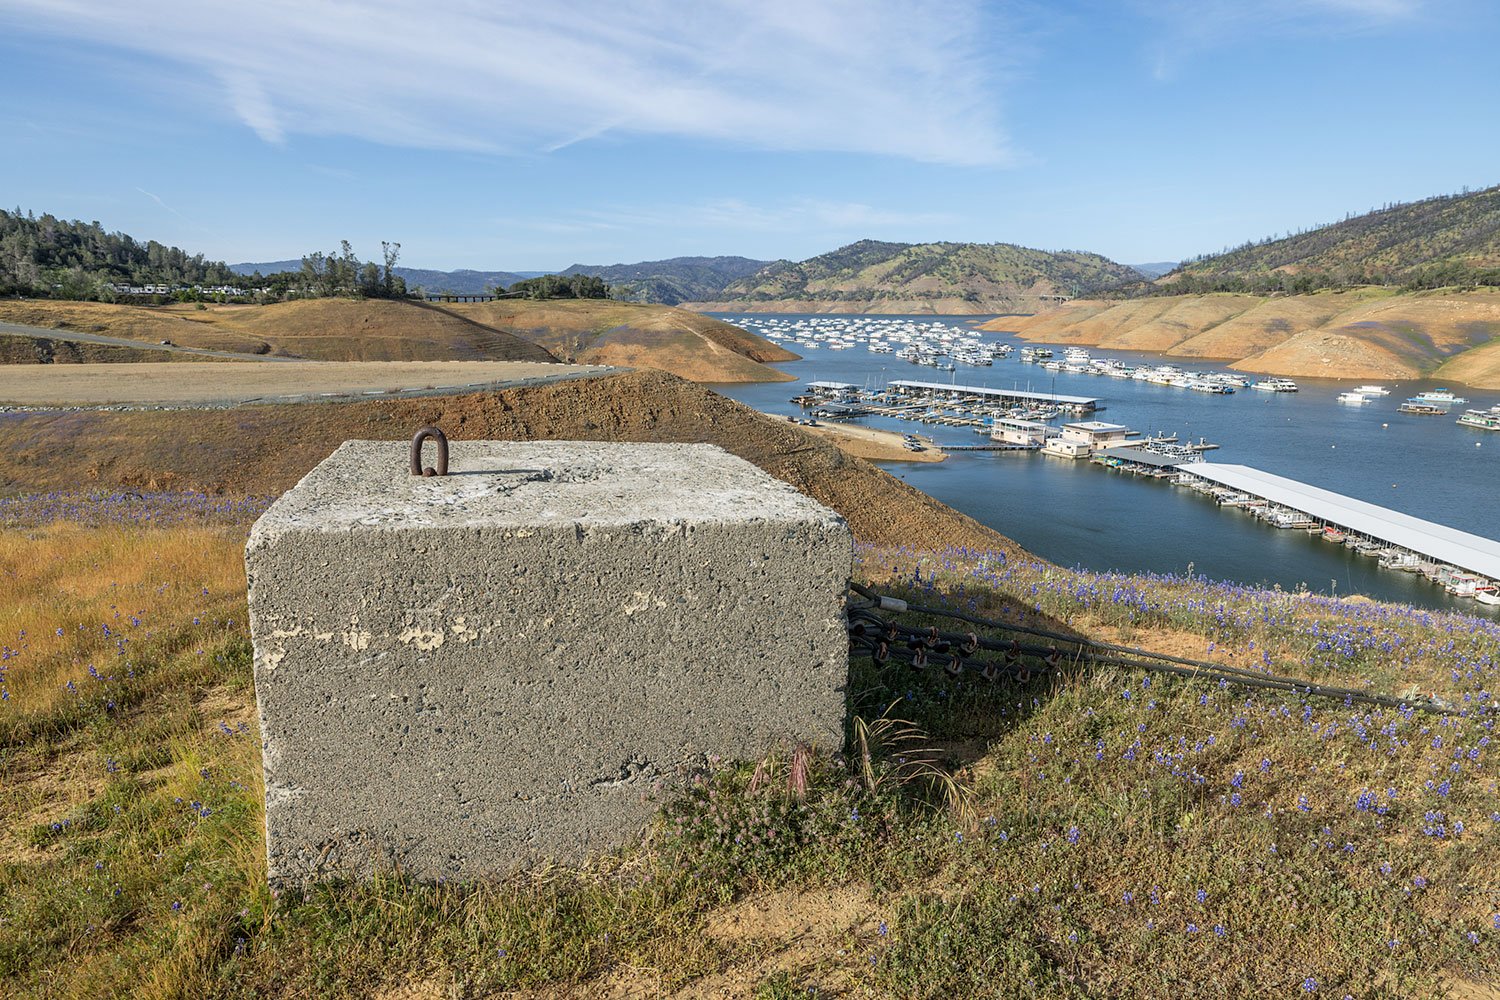 Stranded Marina Anchor. Lake Oroville Reservoir. Oroville, CA 2022 (39°31'54.018" N 121°27'17.928" W)